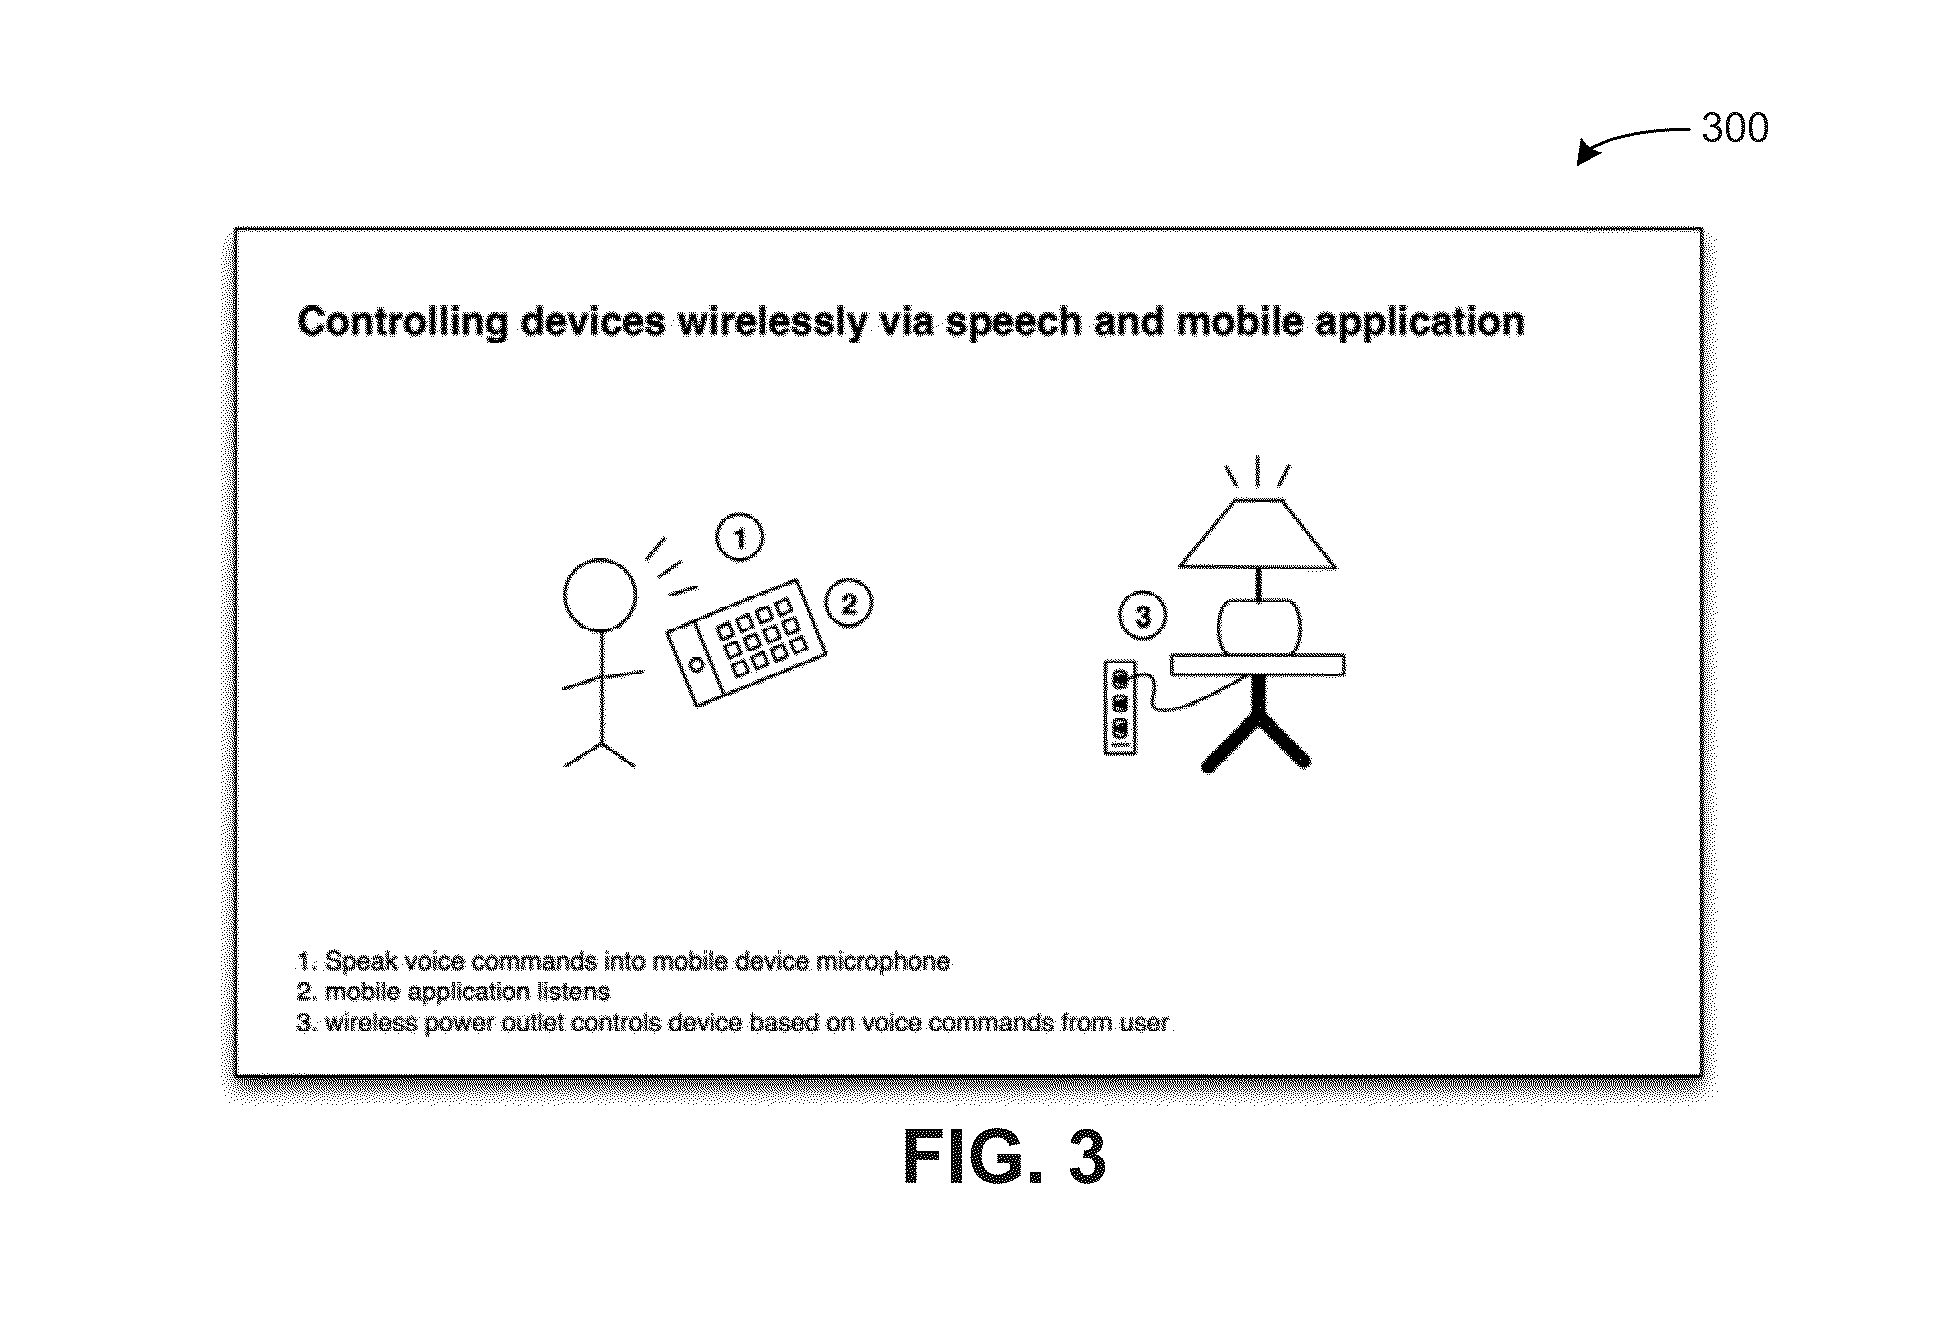 Mobile application for monitoring and controlling devices